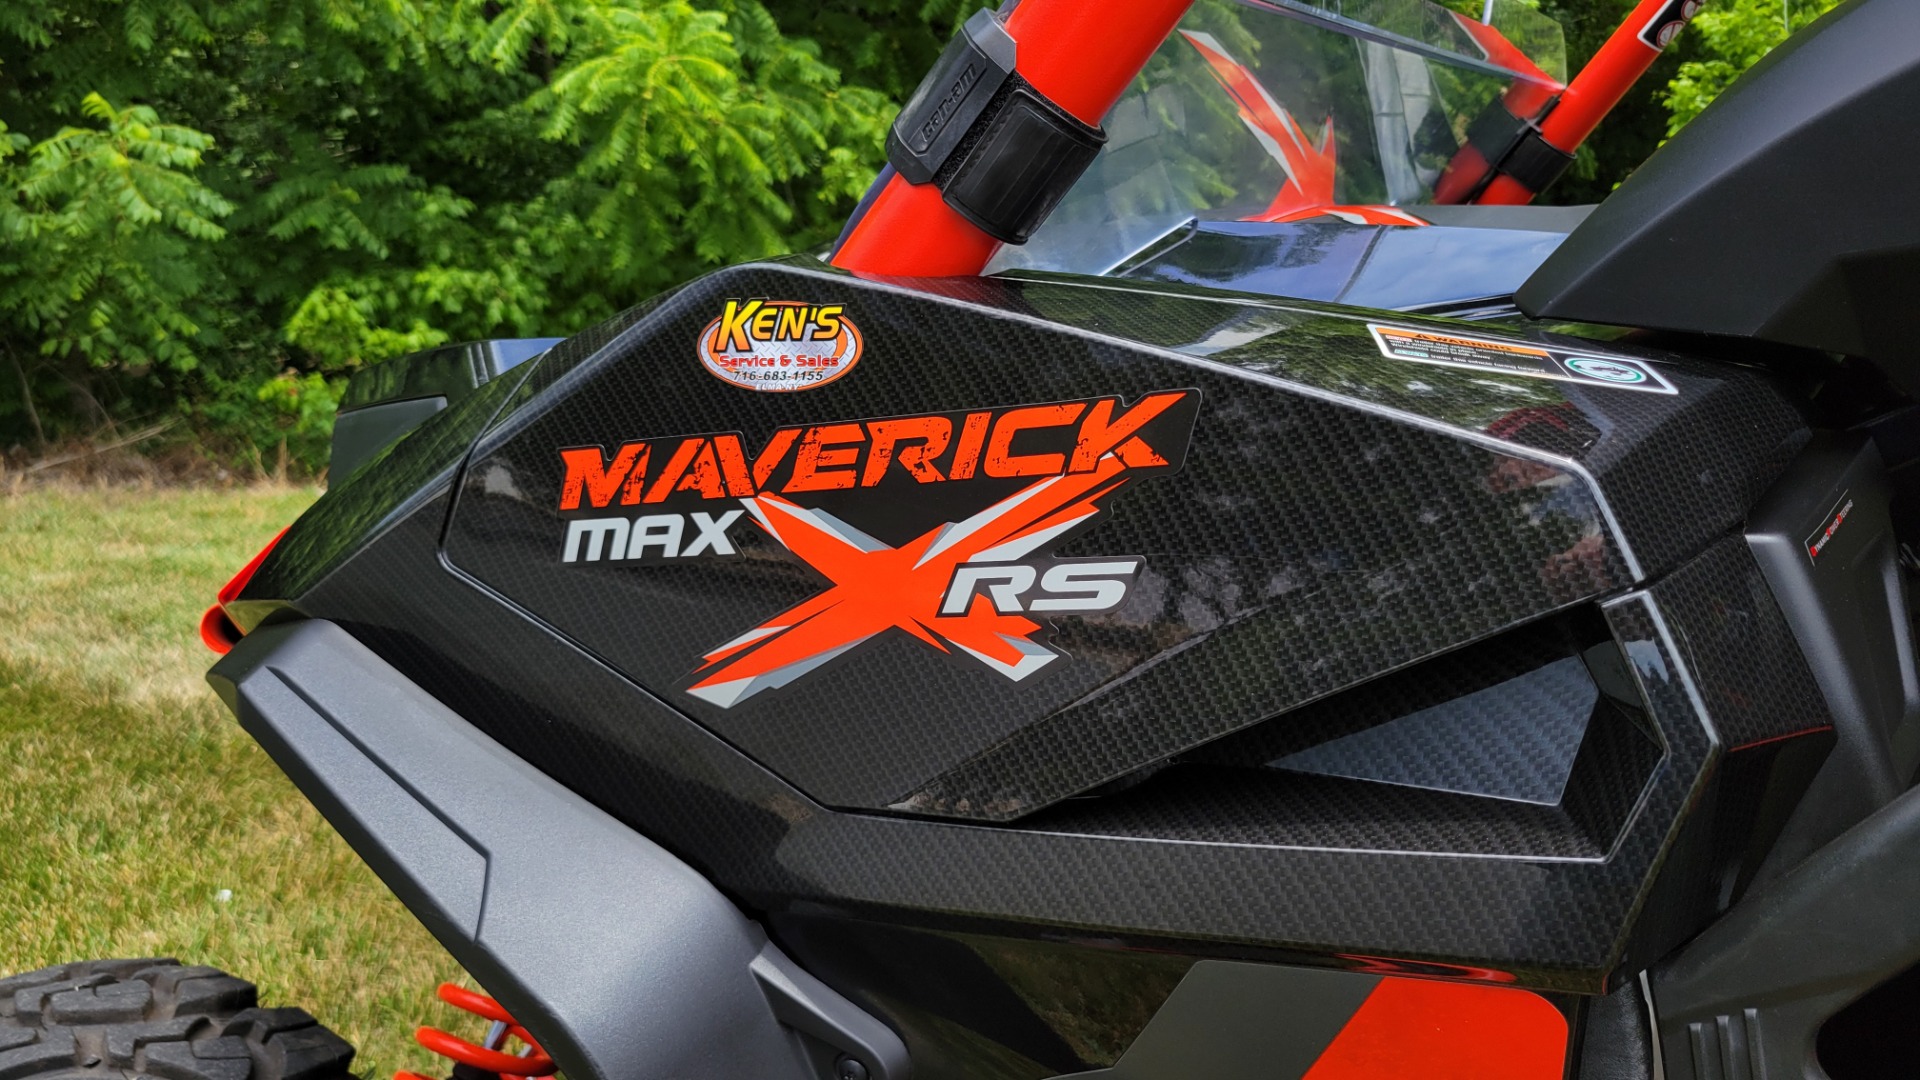 Used 2016 Can-Am MAVERICK MAX X-RS 1000R TURBO / 131HP / 4X4 / 4-SEATER / CUSTOM SOUND SYSTEM for sale $25,995 at Formula Imports in Charlotte NC 28227 20